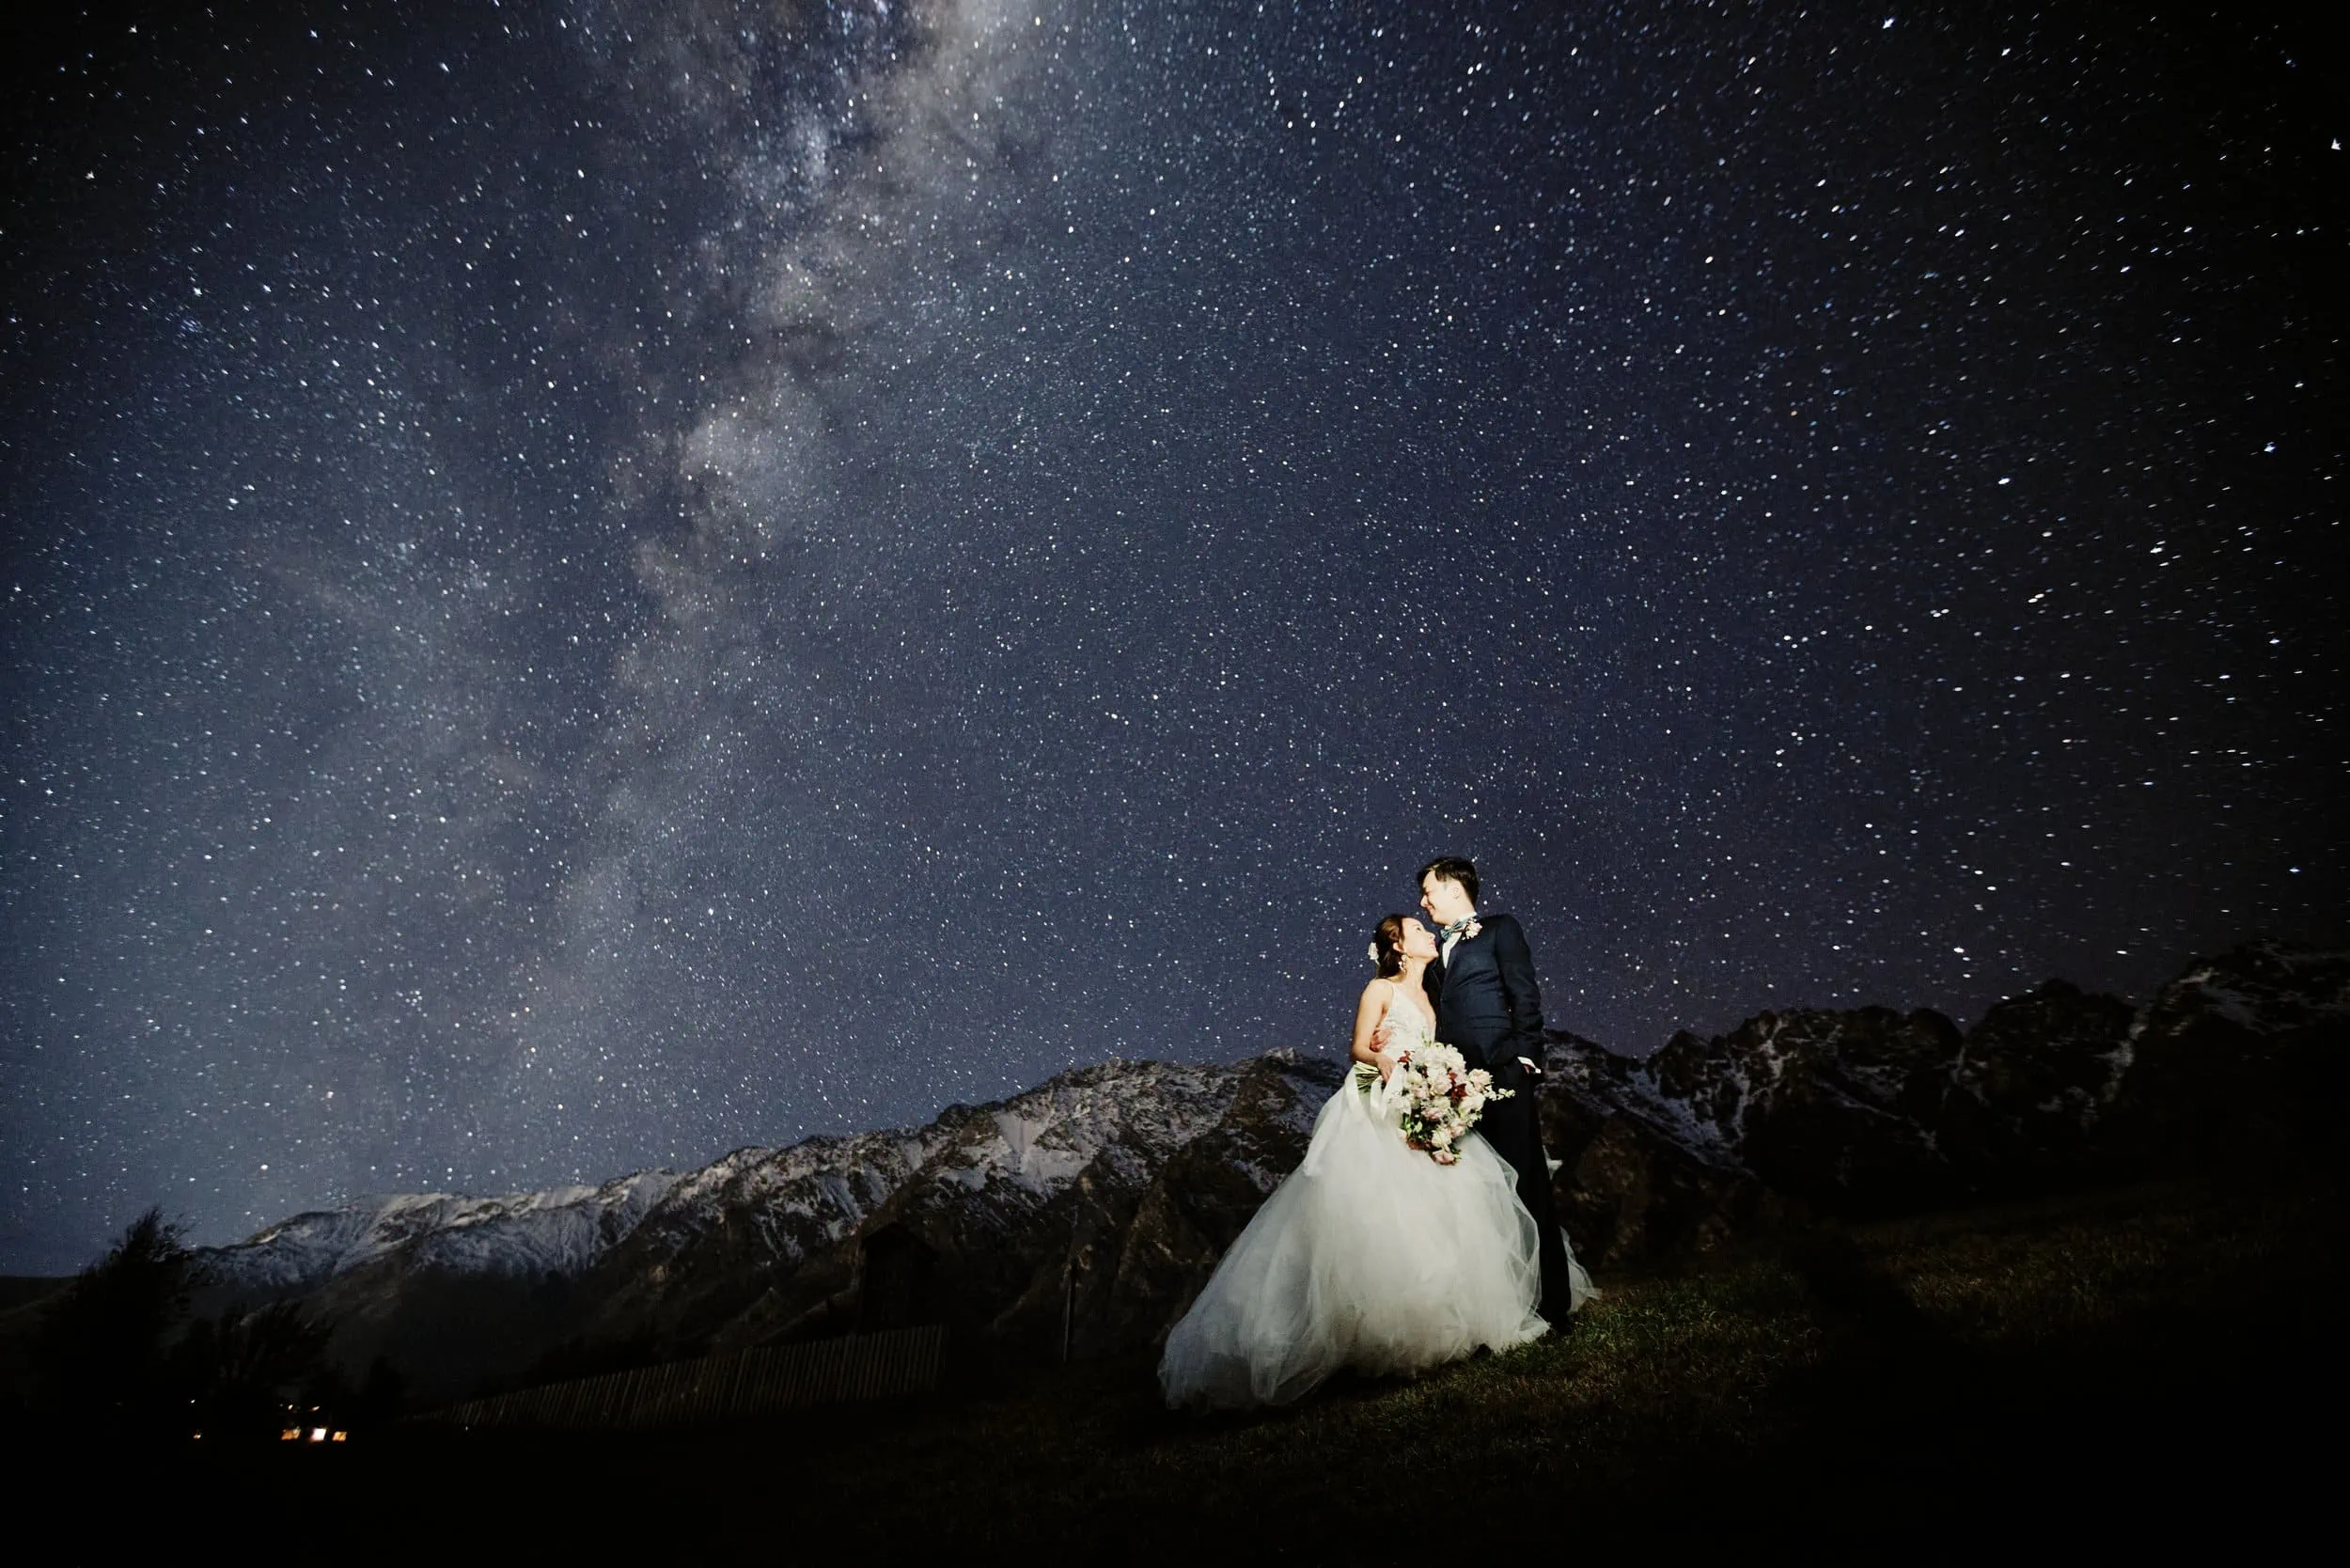 Stephanie and Carven's romantic elopement captured under the starry sky